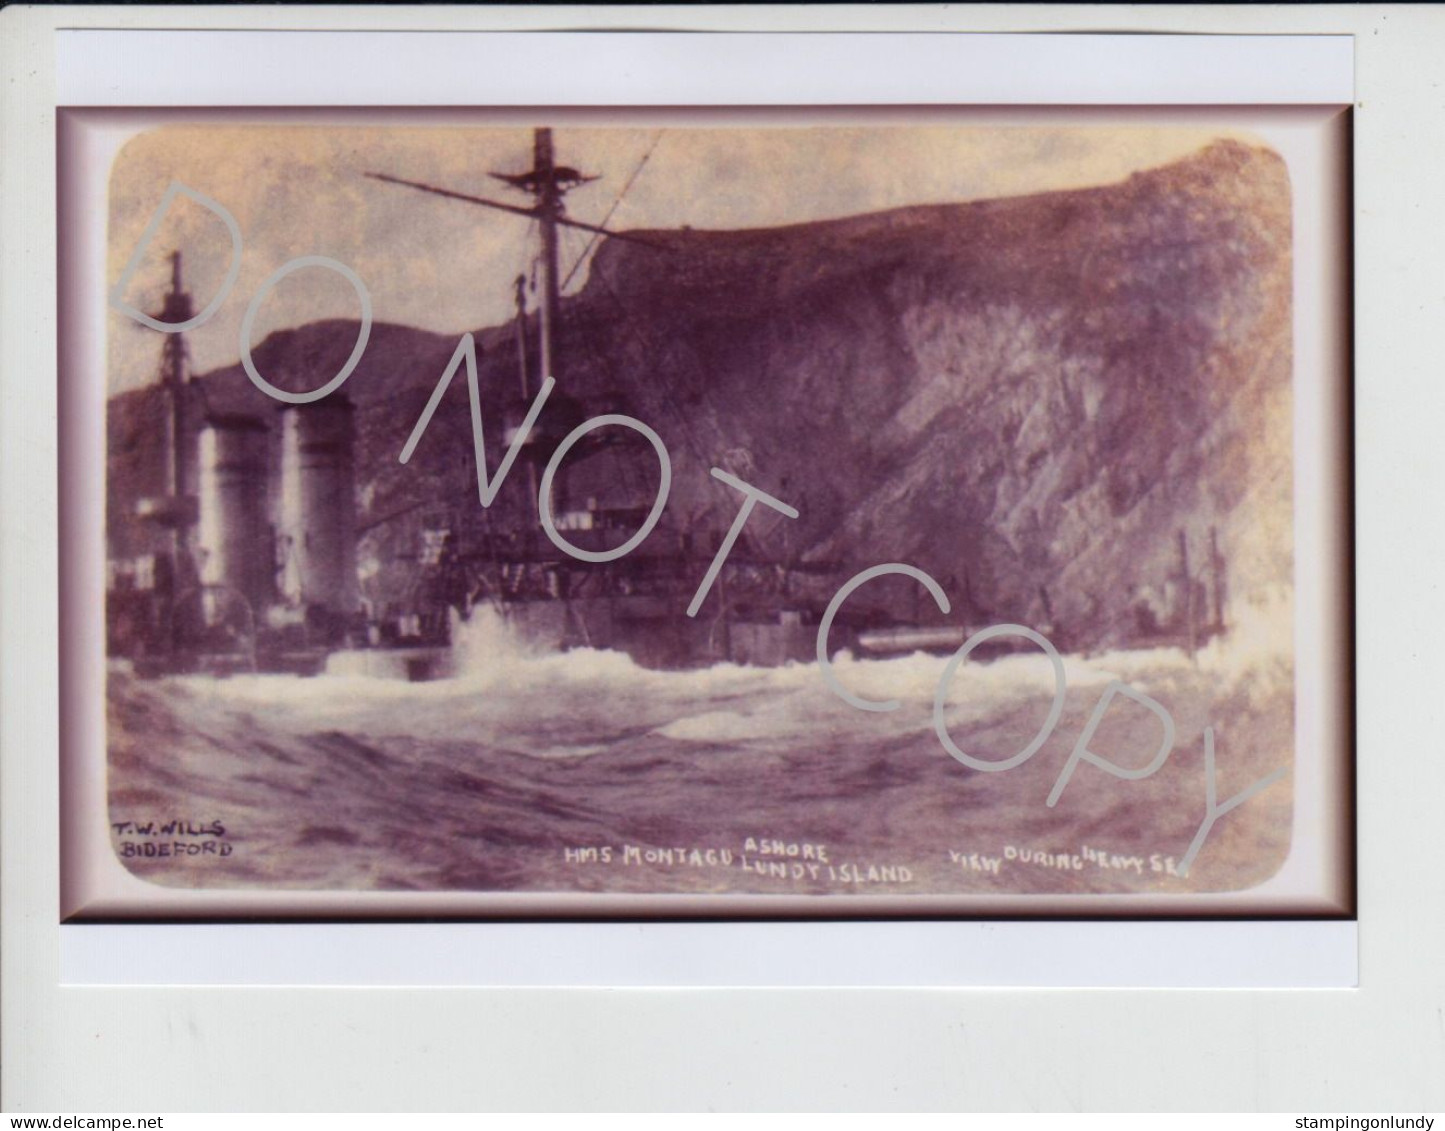 61. WI06. Four Lundy Island HMS Montague/Montagu Warship Produced By Wills Retirment Sale Price Slashed! - War, Military